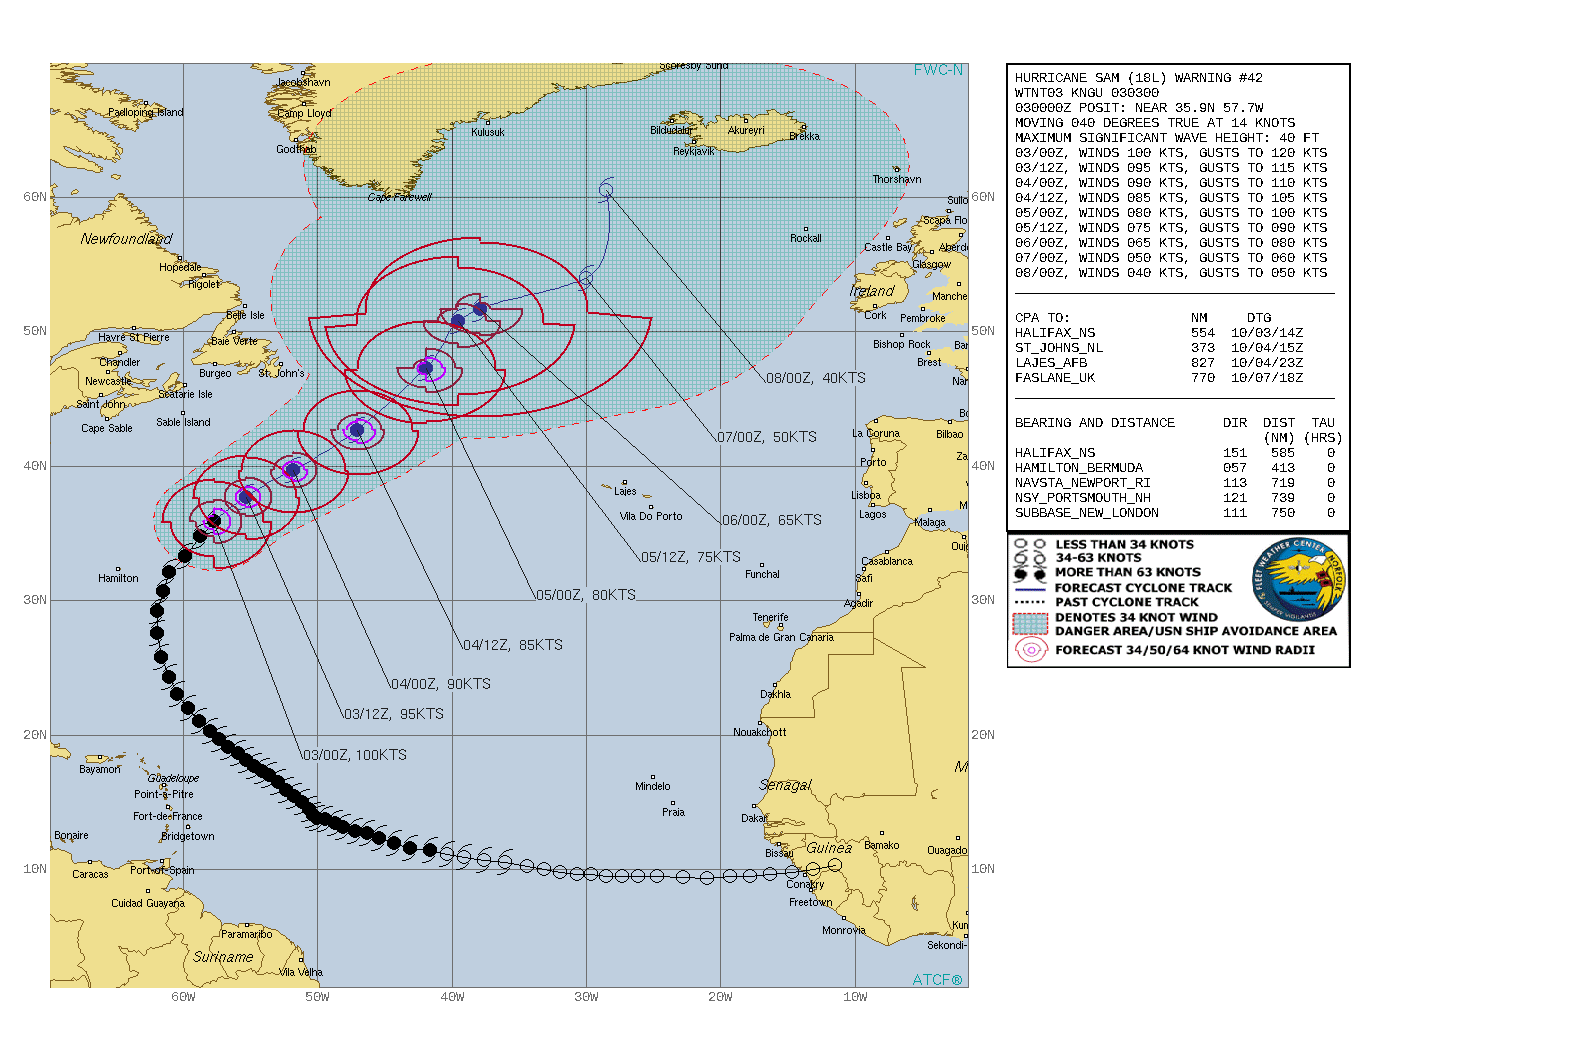 CURRENT INTENSITY IS 100KNOTS/CAT 3 AND IS FORECAST TO DECREASE AT 80KNOTS/CAT 1 BY 05/00UTC.